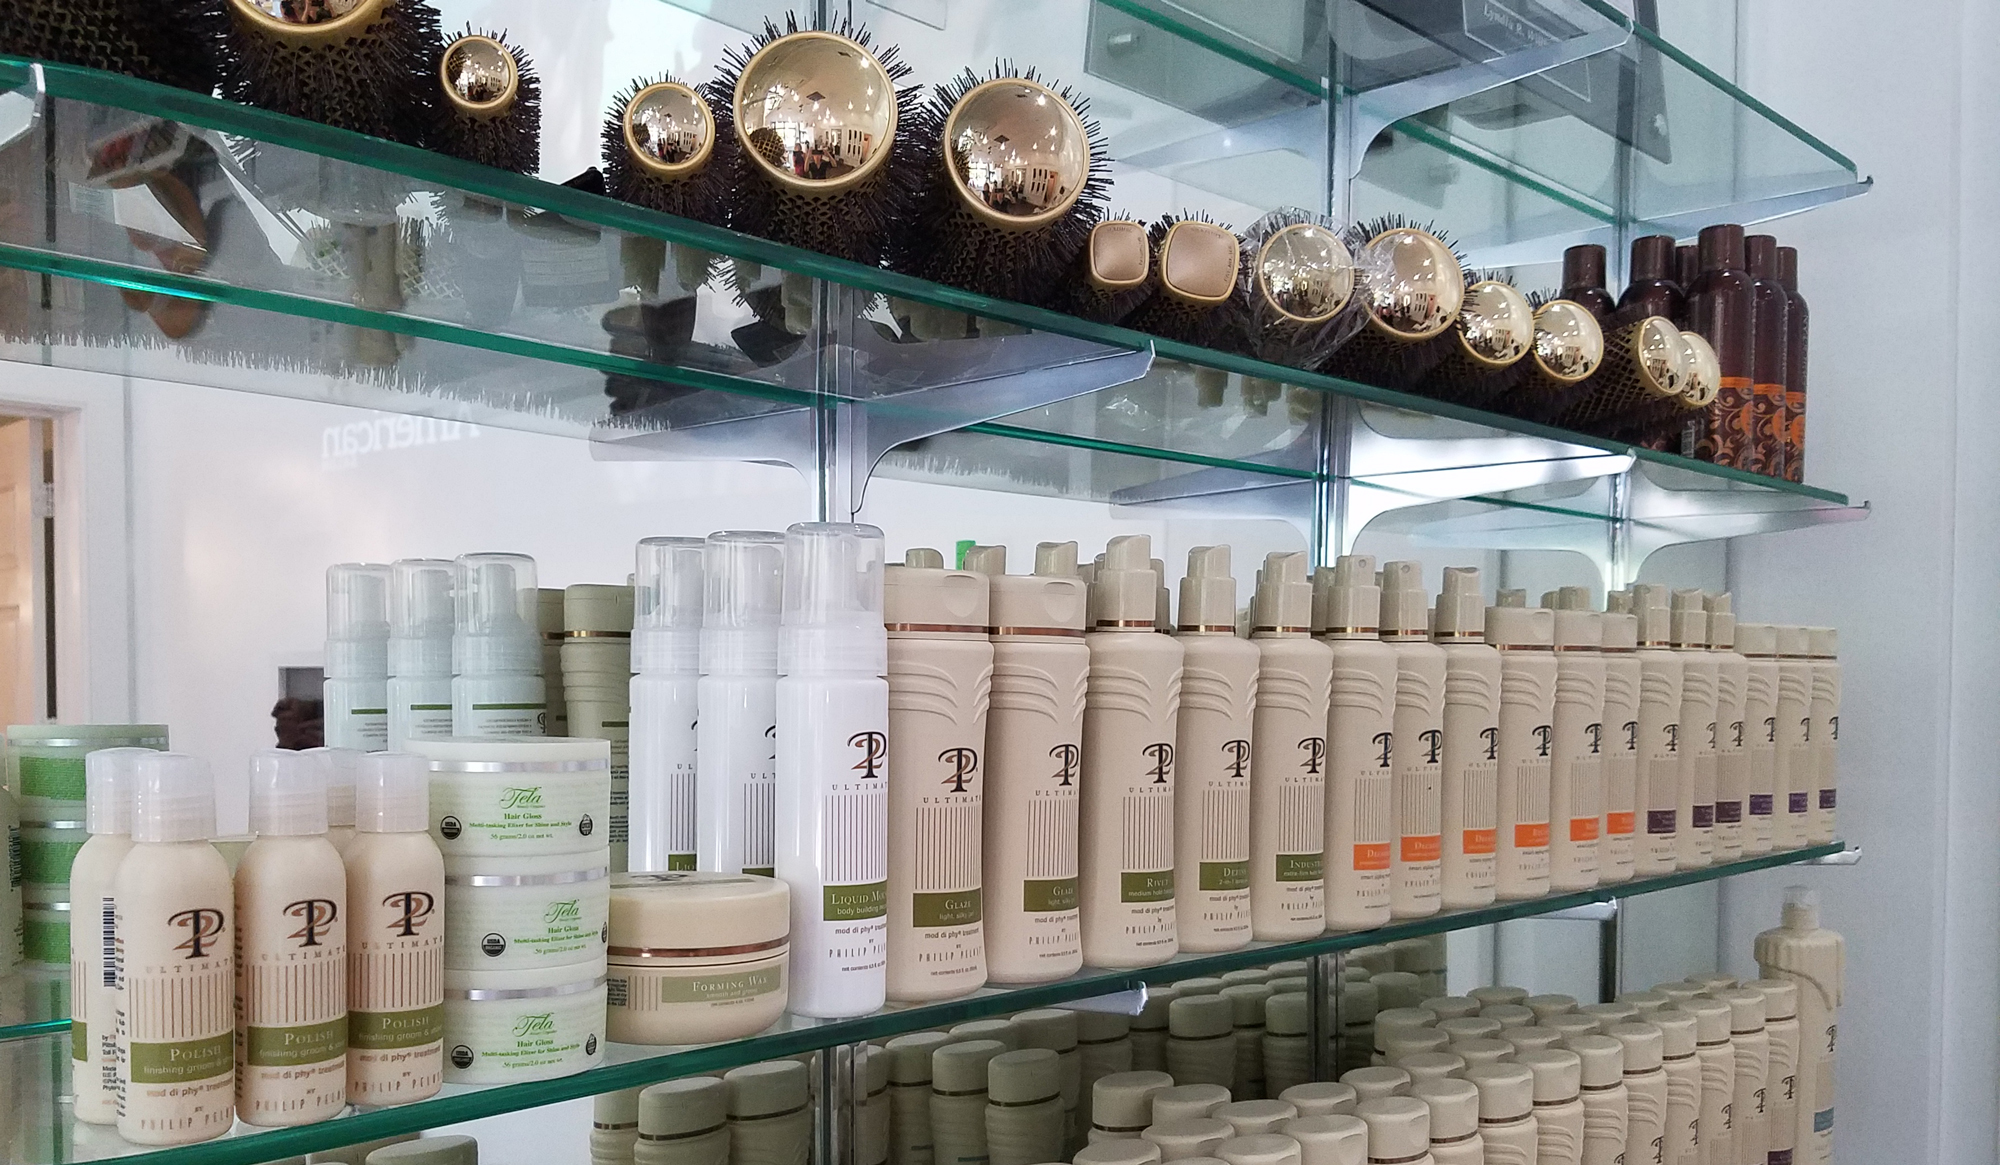 Hairdreams and Phillip Pelusi hair care products